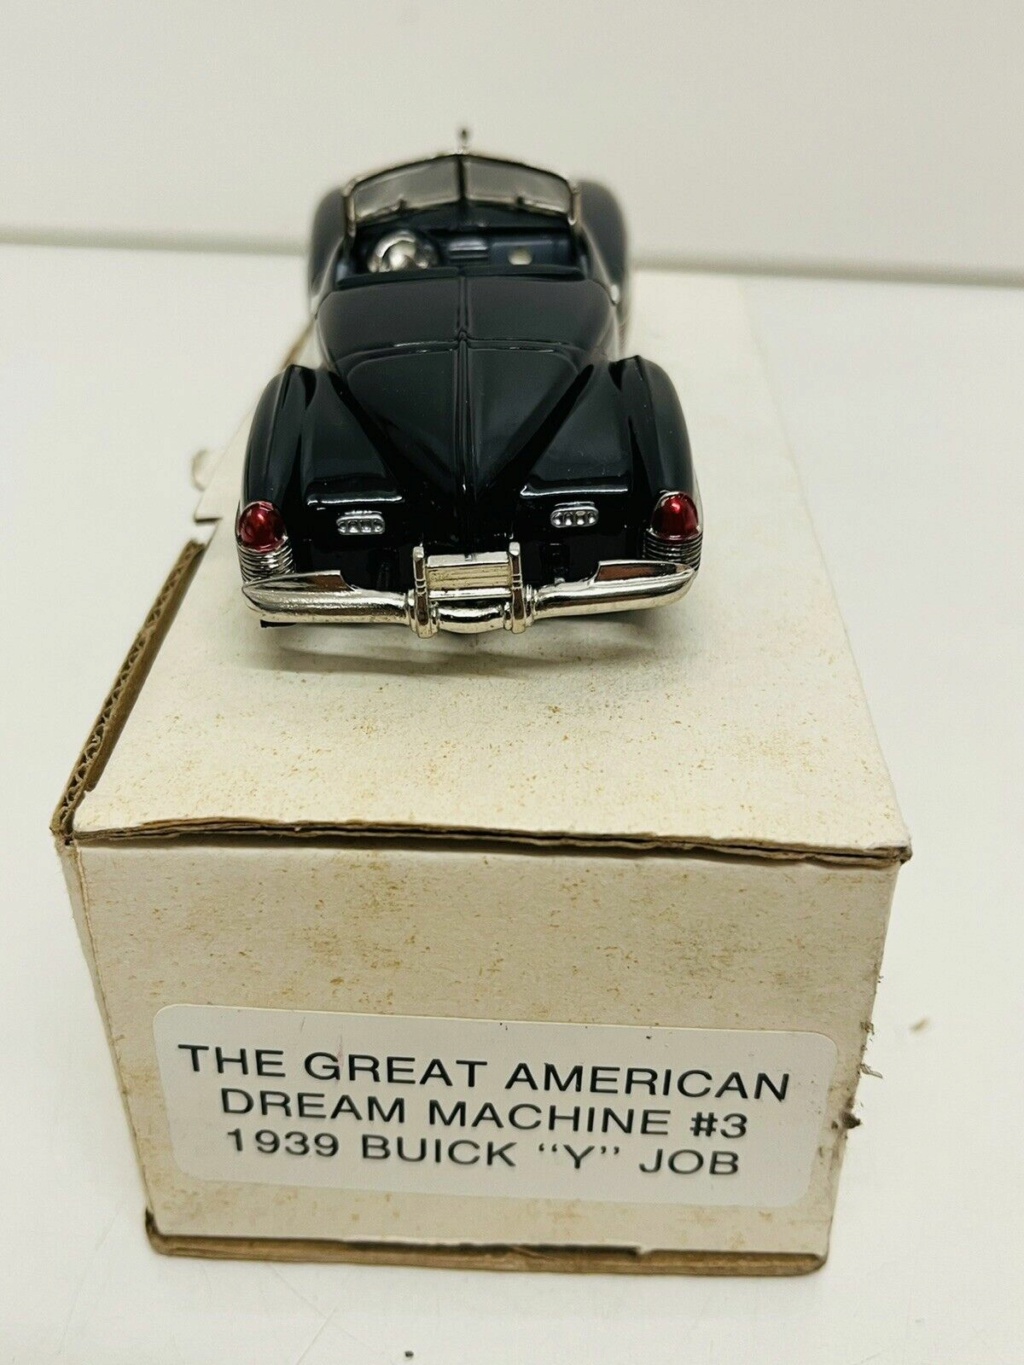 THE GREAT AMERICAN DREAM MACHINE - 1/43 diecast 50s concept car - made in England S-l16268